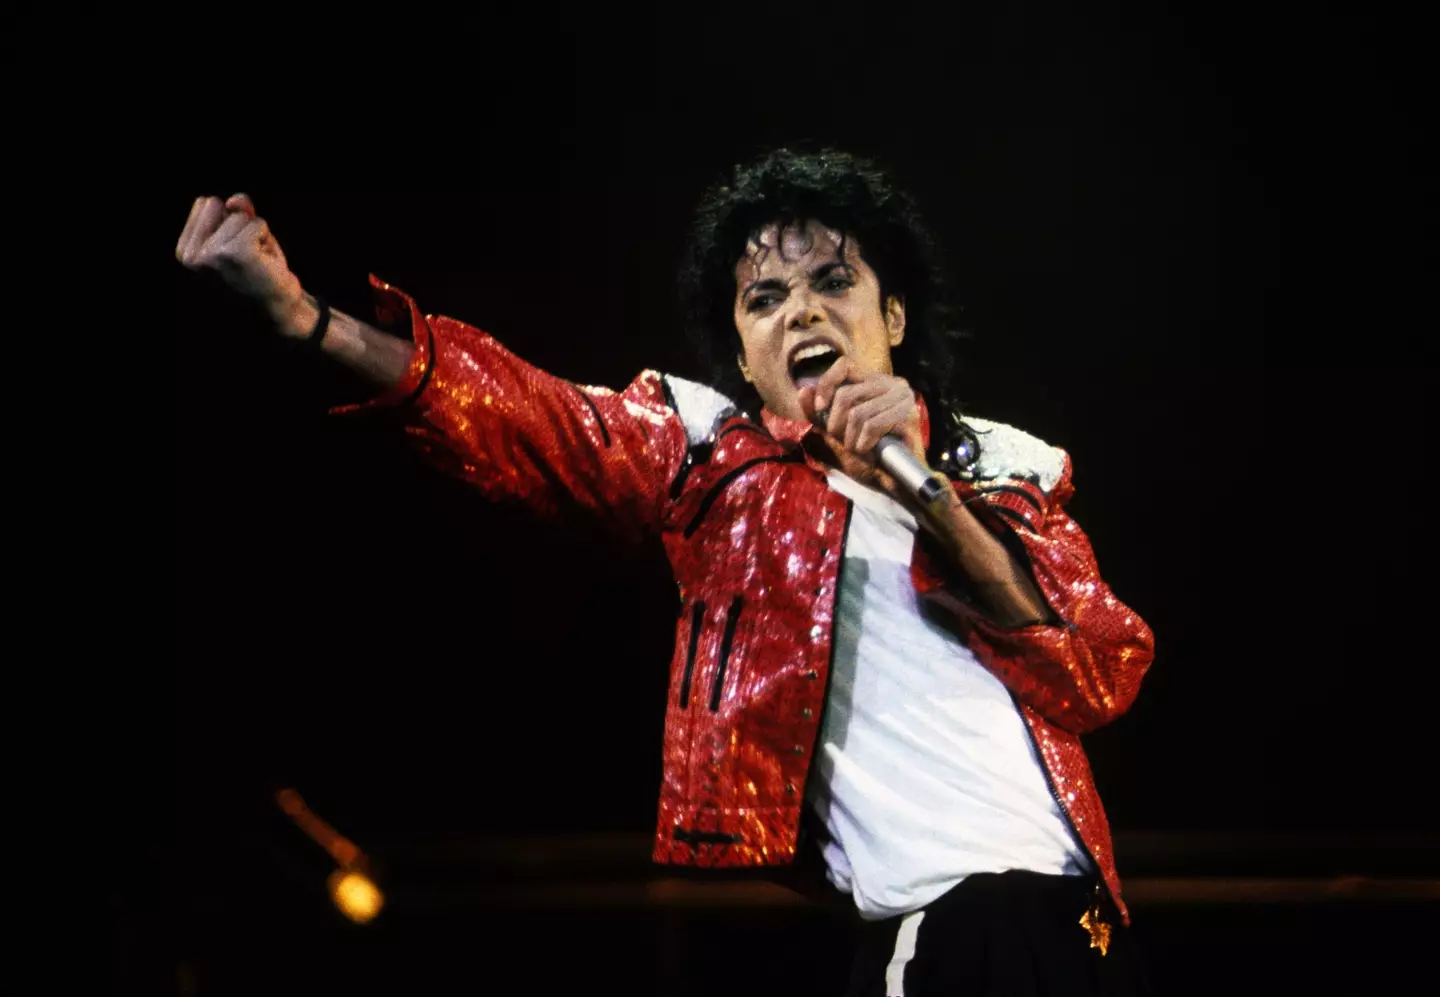 Michael Jackson revealed the biggest regret of his career in an interview.